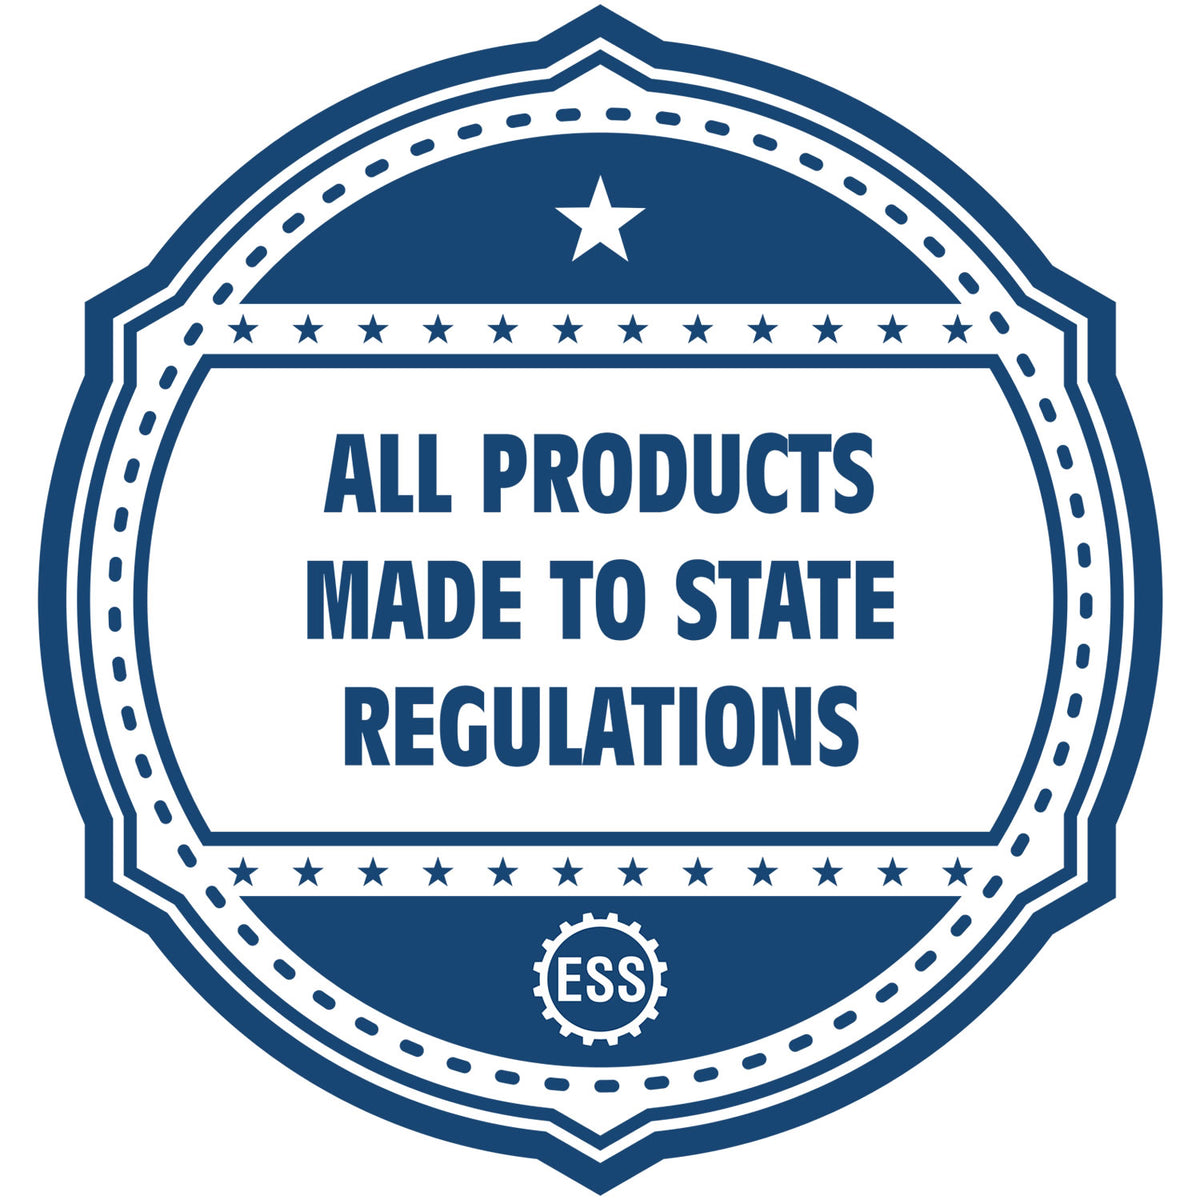 An icon or badge element for the Super Slim Pennsylvania Notary Public Stamp showing that this product is made in compliance with state regulations.